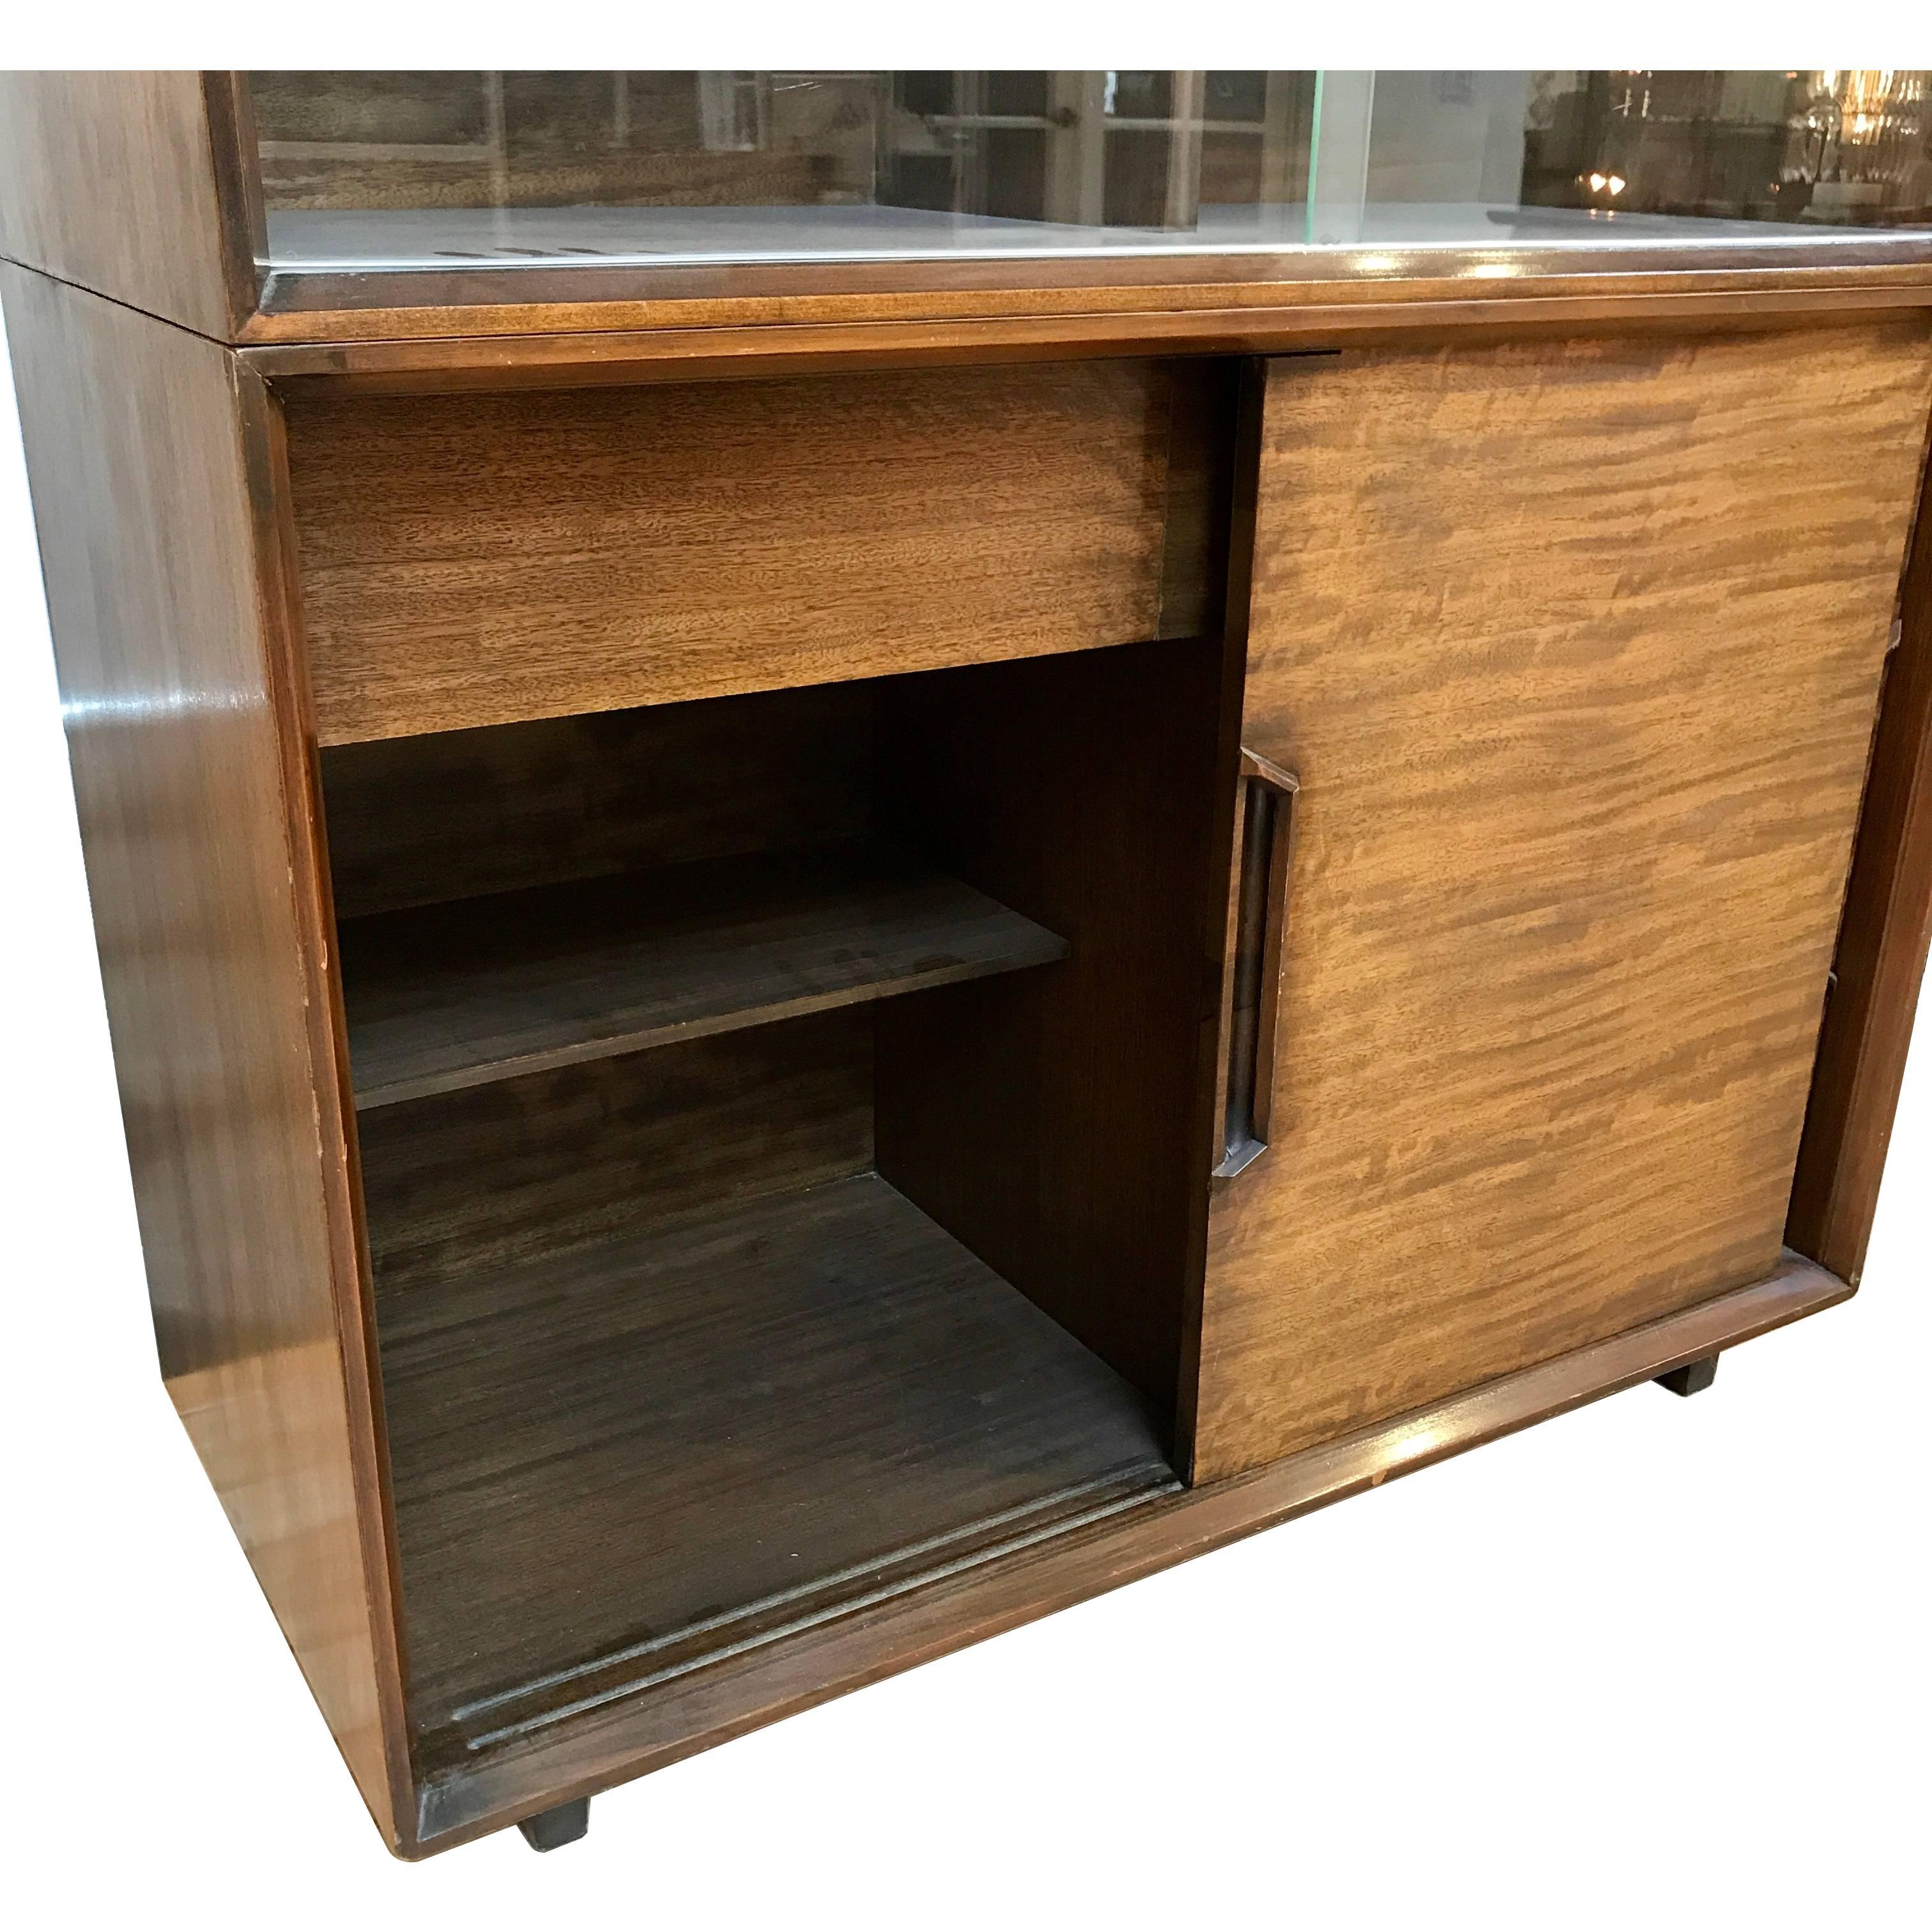 American 1950s Milo Baughman for Drexel Perspective Mindoro Wood China Hutch For Sale